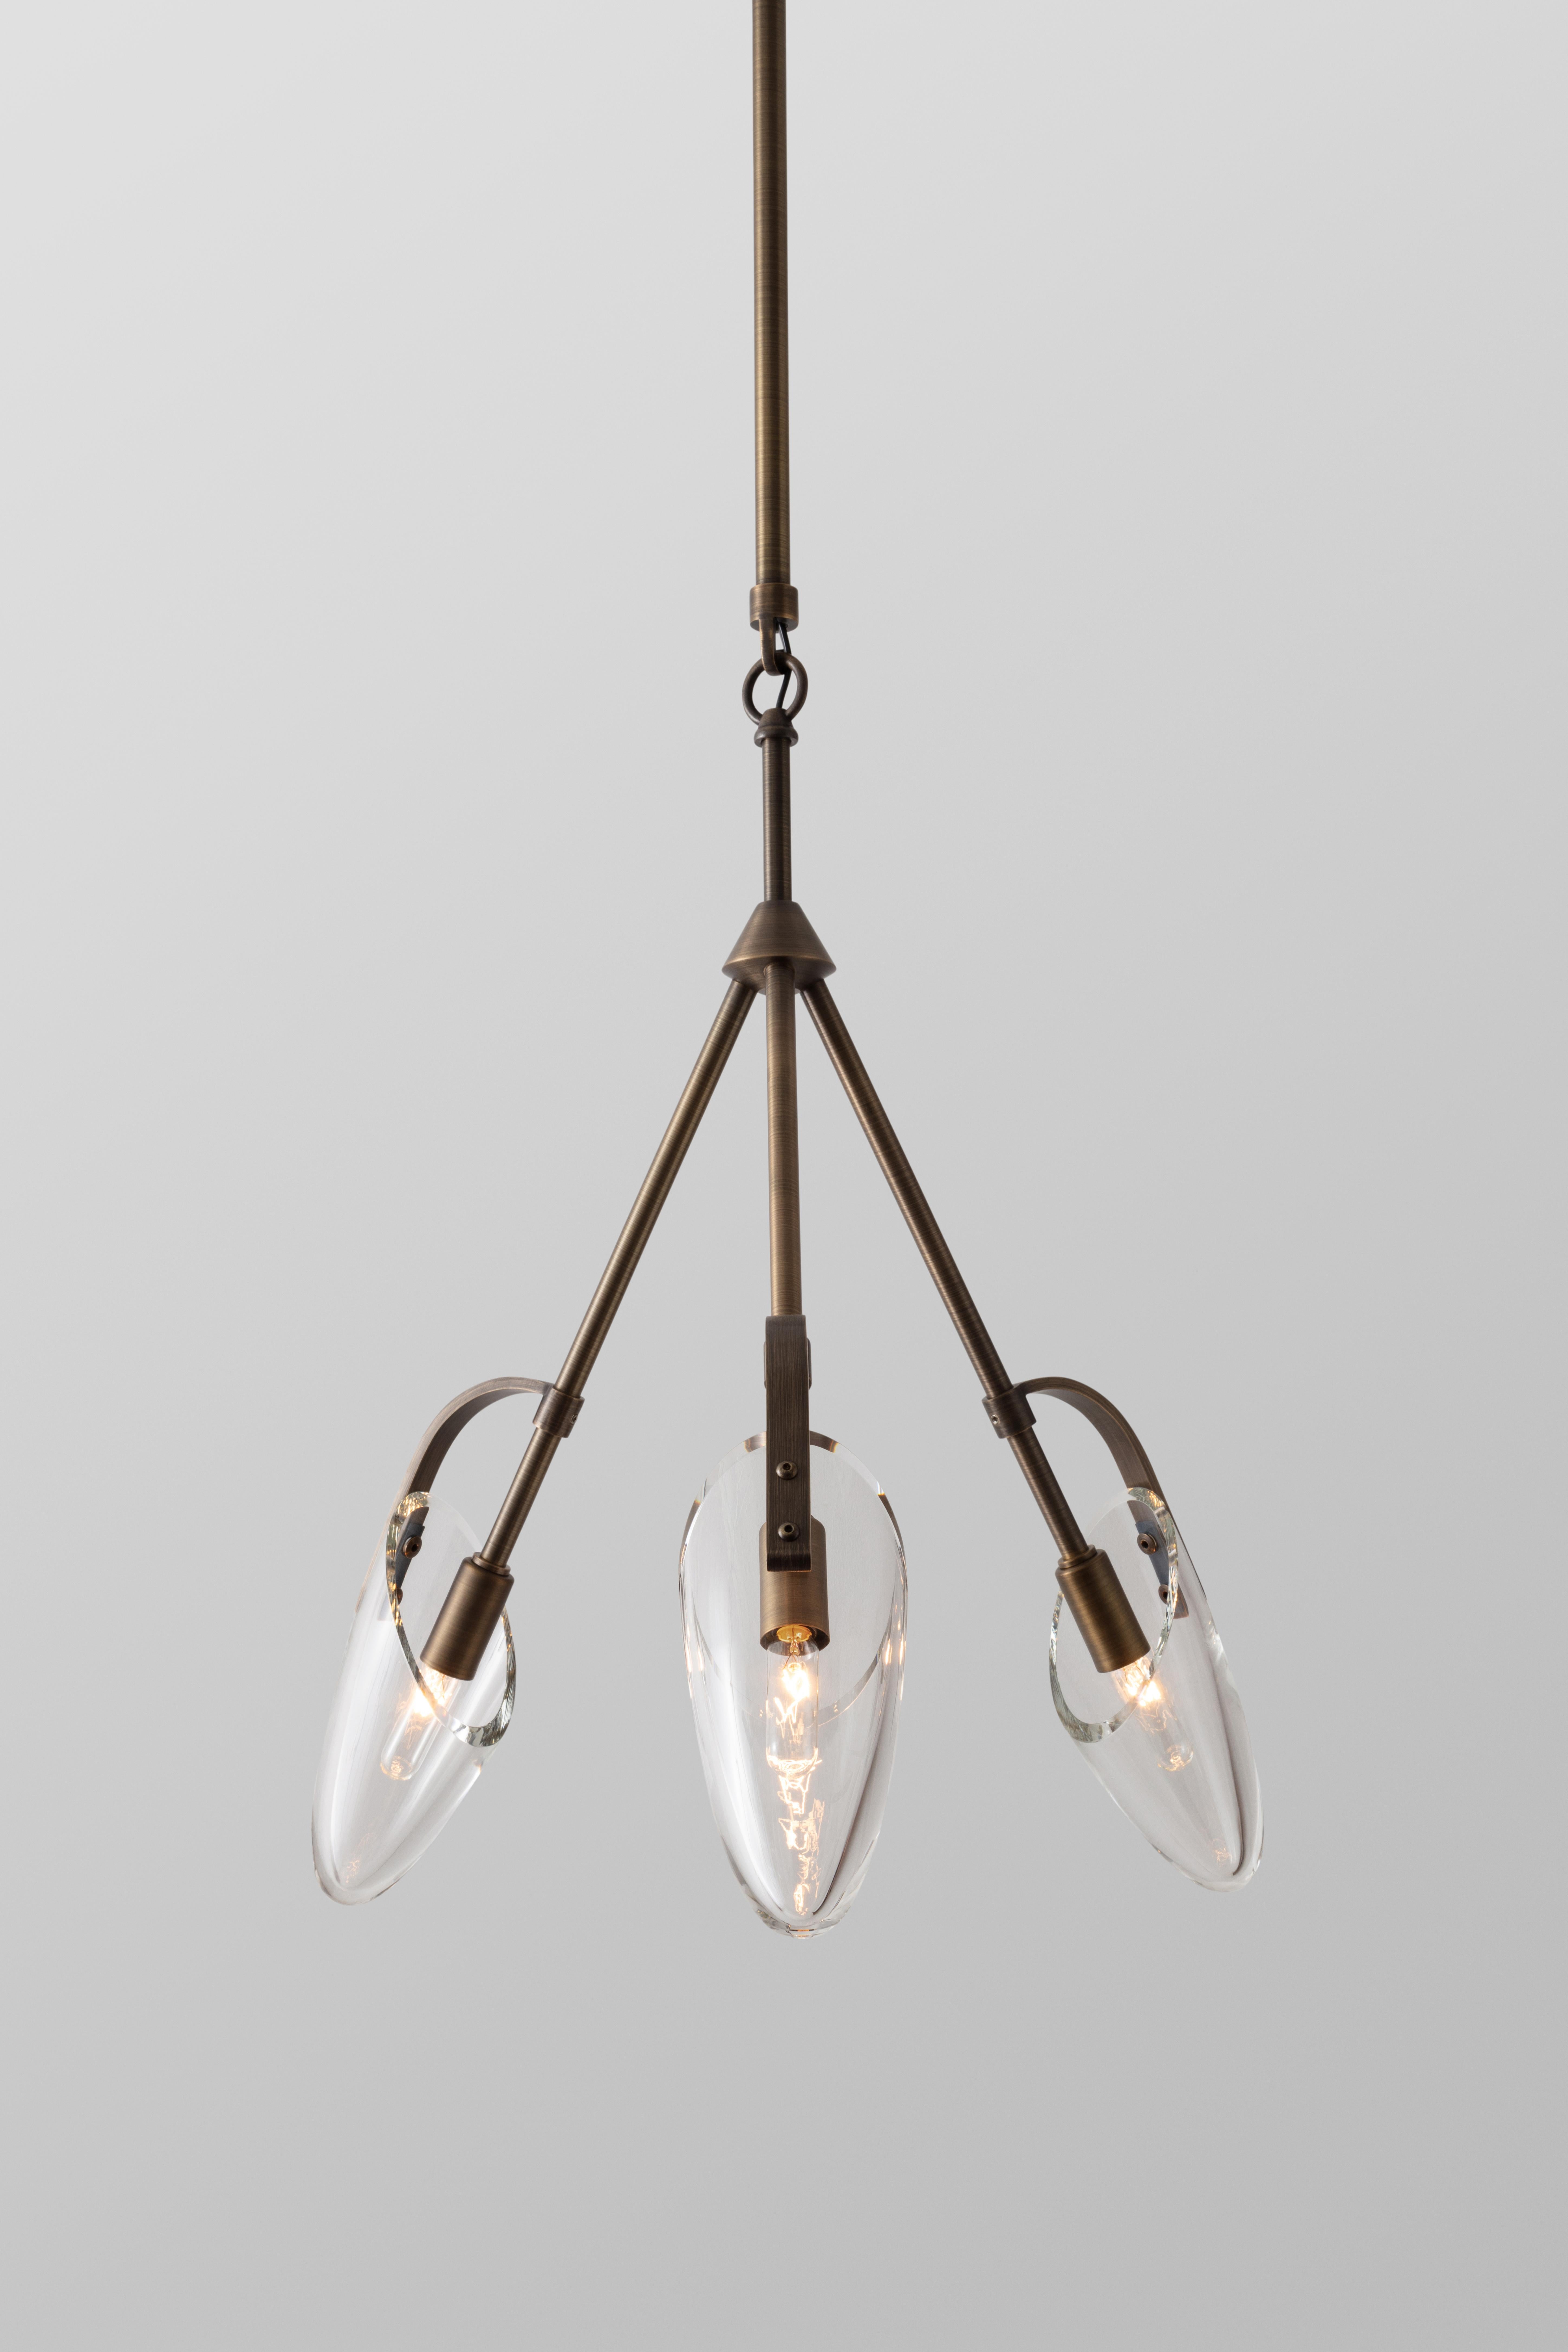 The Kinesis Pendant is part of a modular lighting system. This pendant has three mouth-blown glass diffusers and is available in a variety of metal finishes. The details of Kinesis, owe their beauty to a merging of traditional hand craftsmanship and